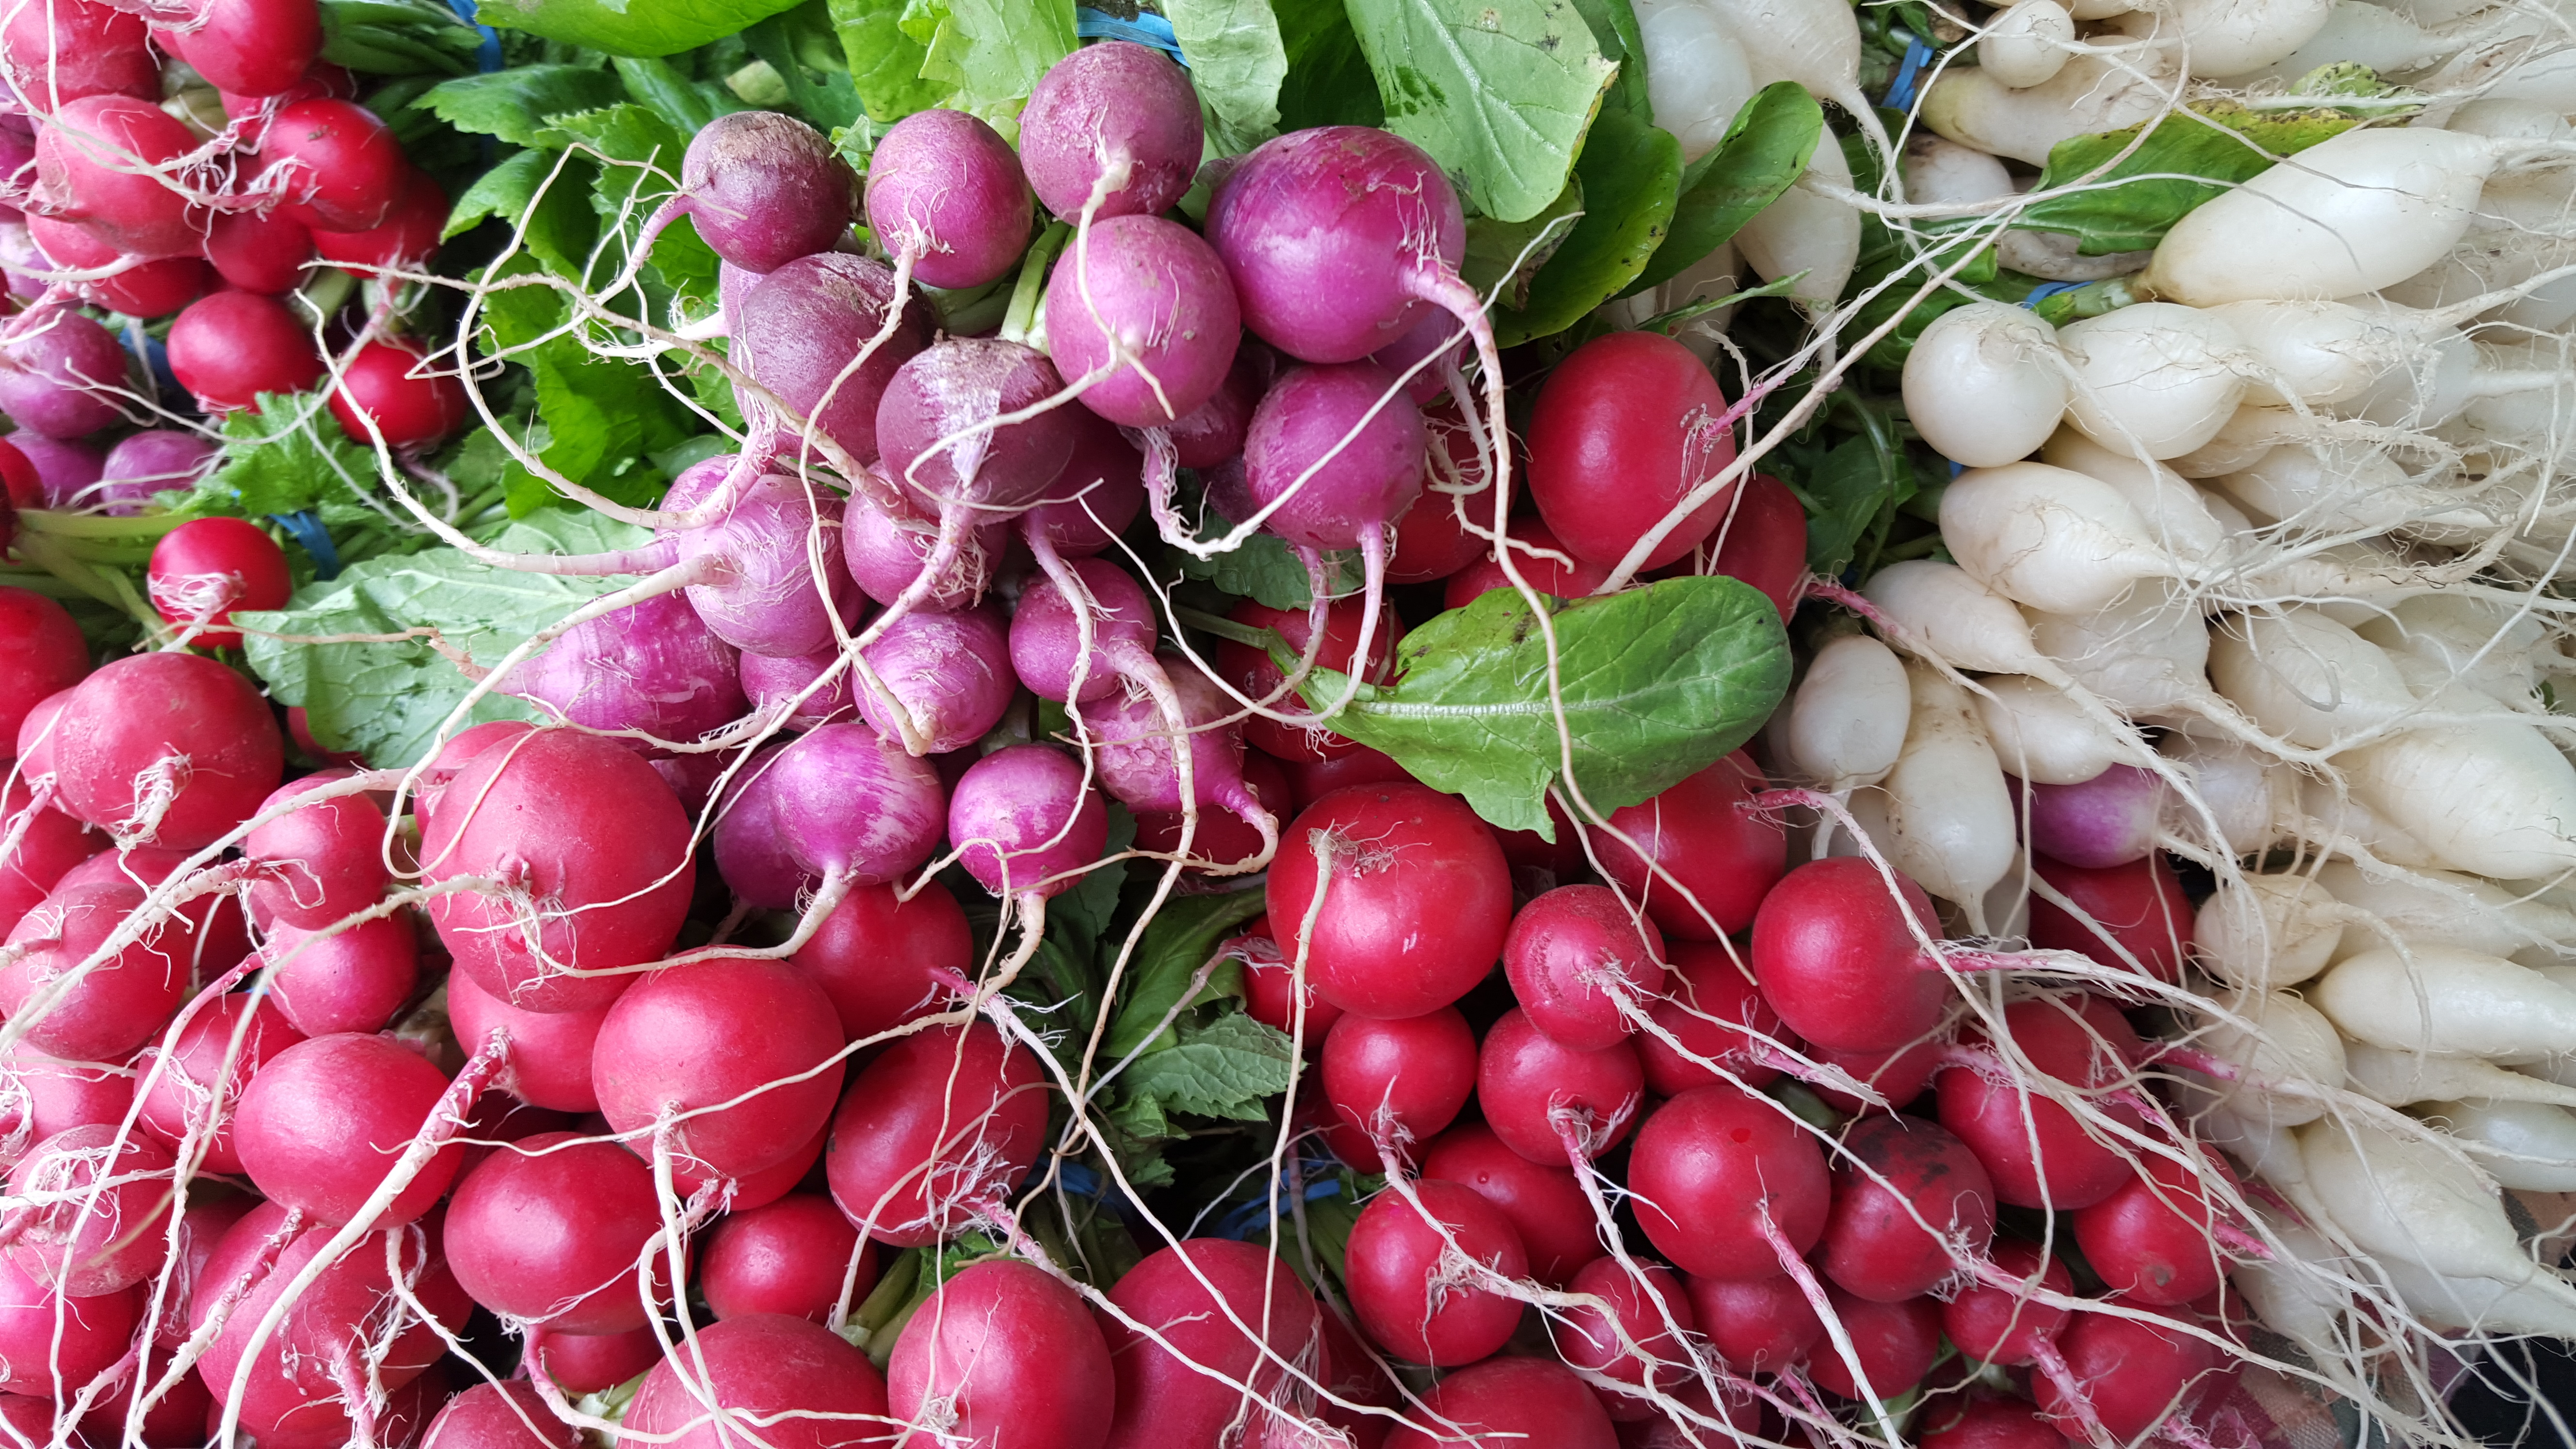 Gorgeous radishes from RJ Farms this week!